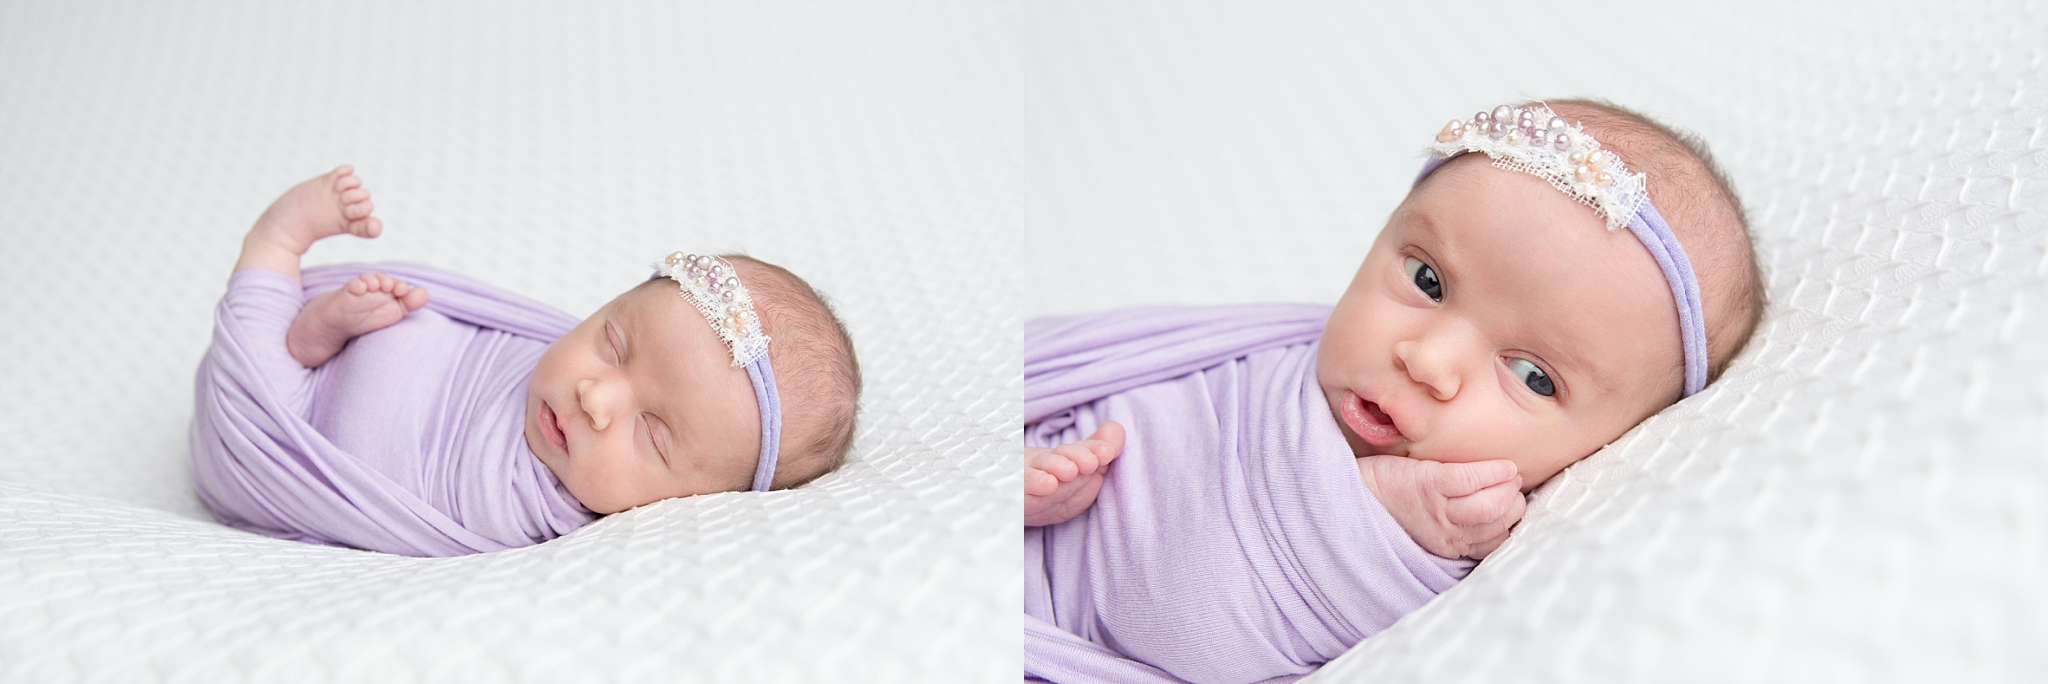 st-louis-newborn-photographer-girl-wrapped-in-purple-making-a-funny-face.jpg